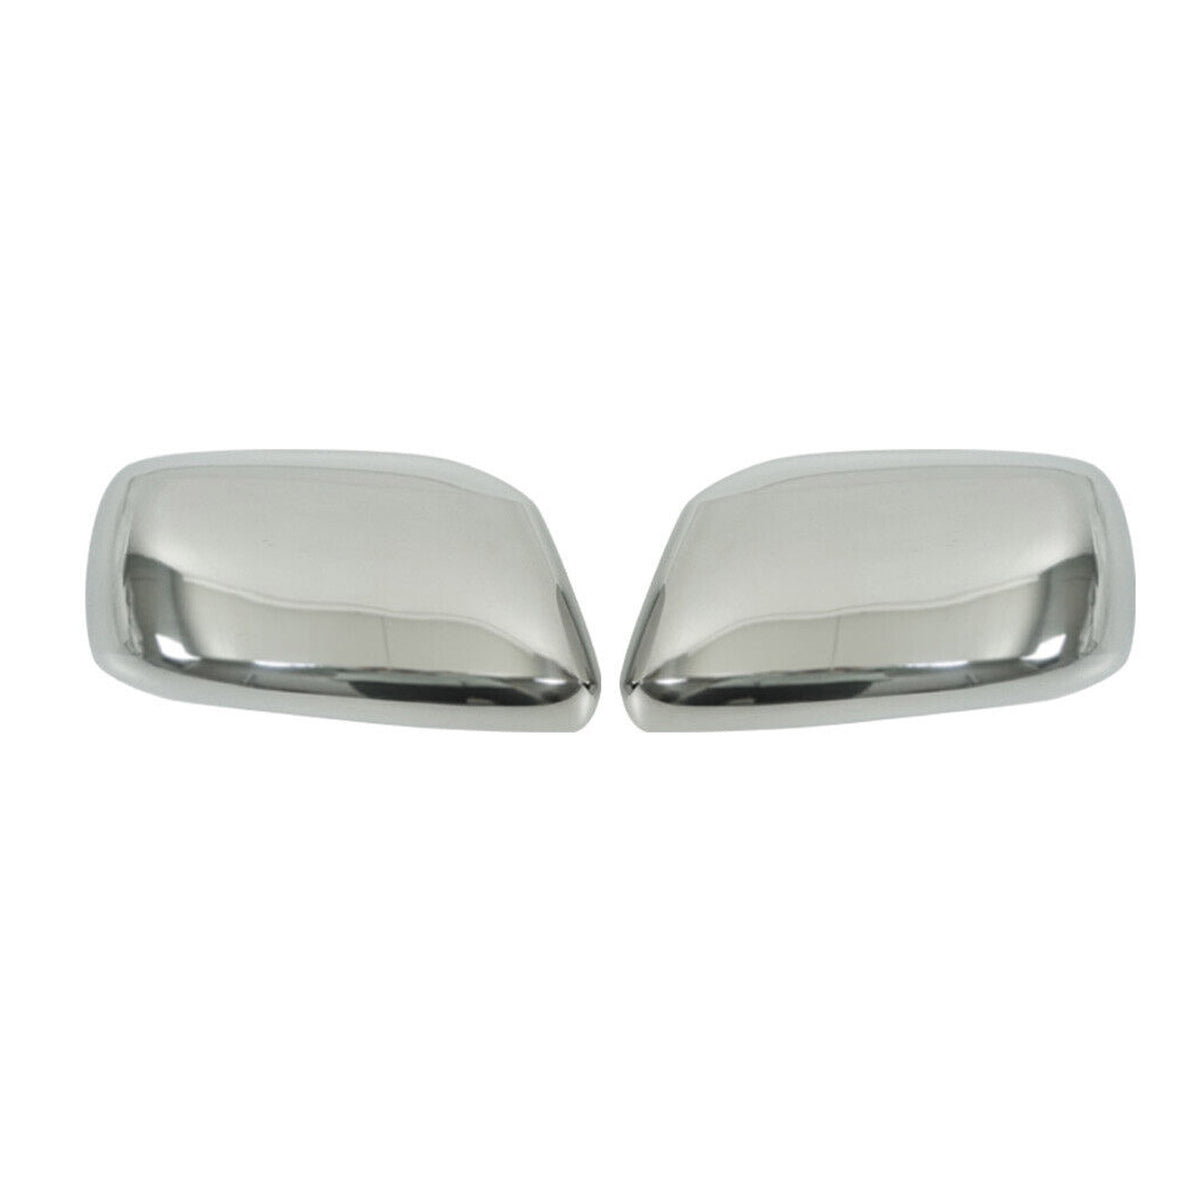 Mirror Caps Mirror Cover for Nissan Pathfinder 2005-2012 Stainless Steel Silver